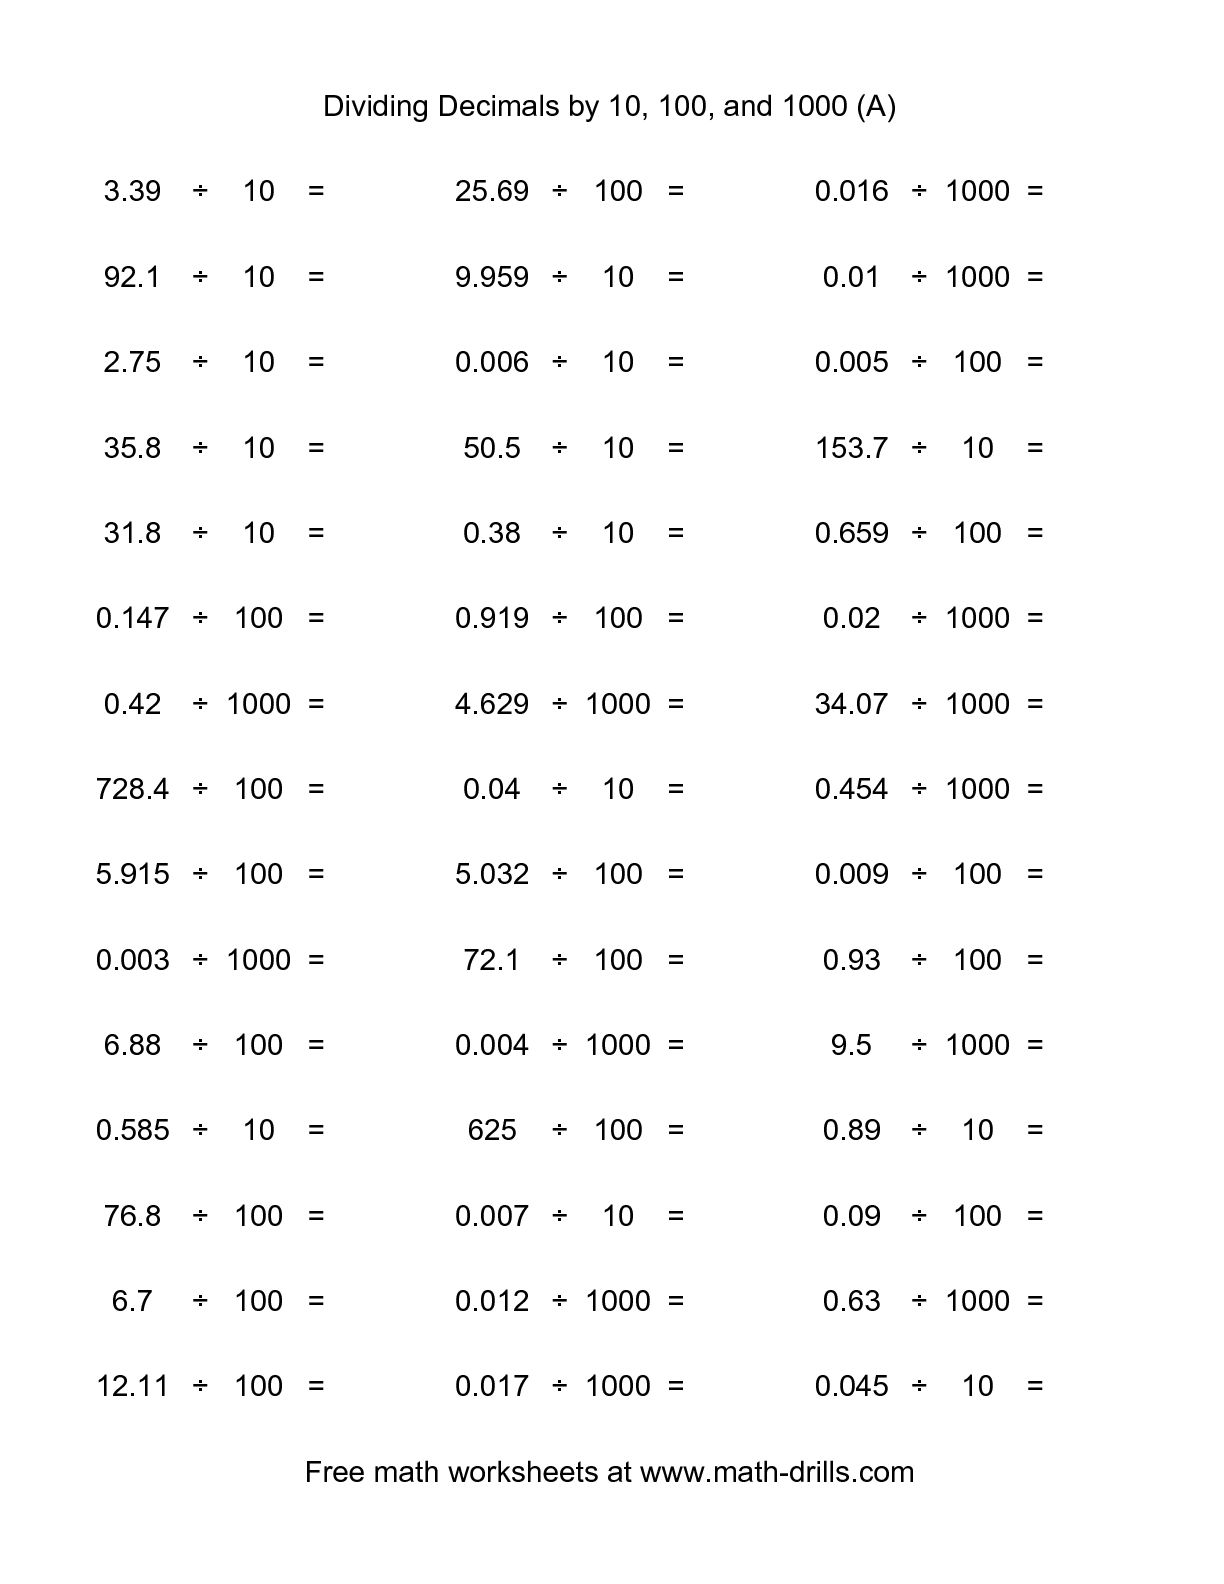 multiplication-and-division-of-decimals-worksheets-pdf-times-tables-free-printable-multiplying